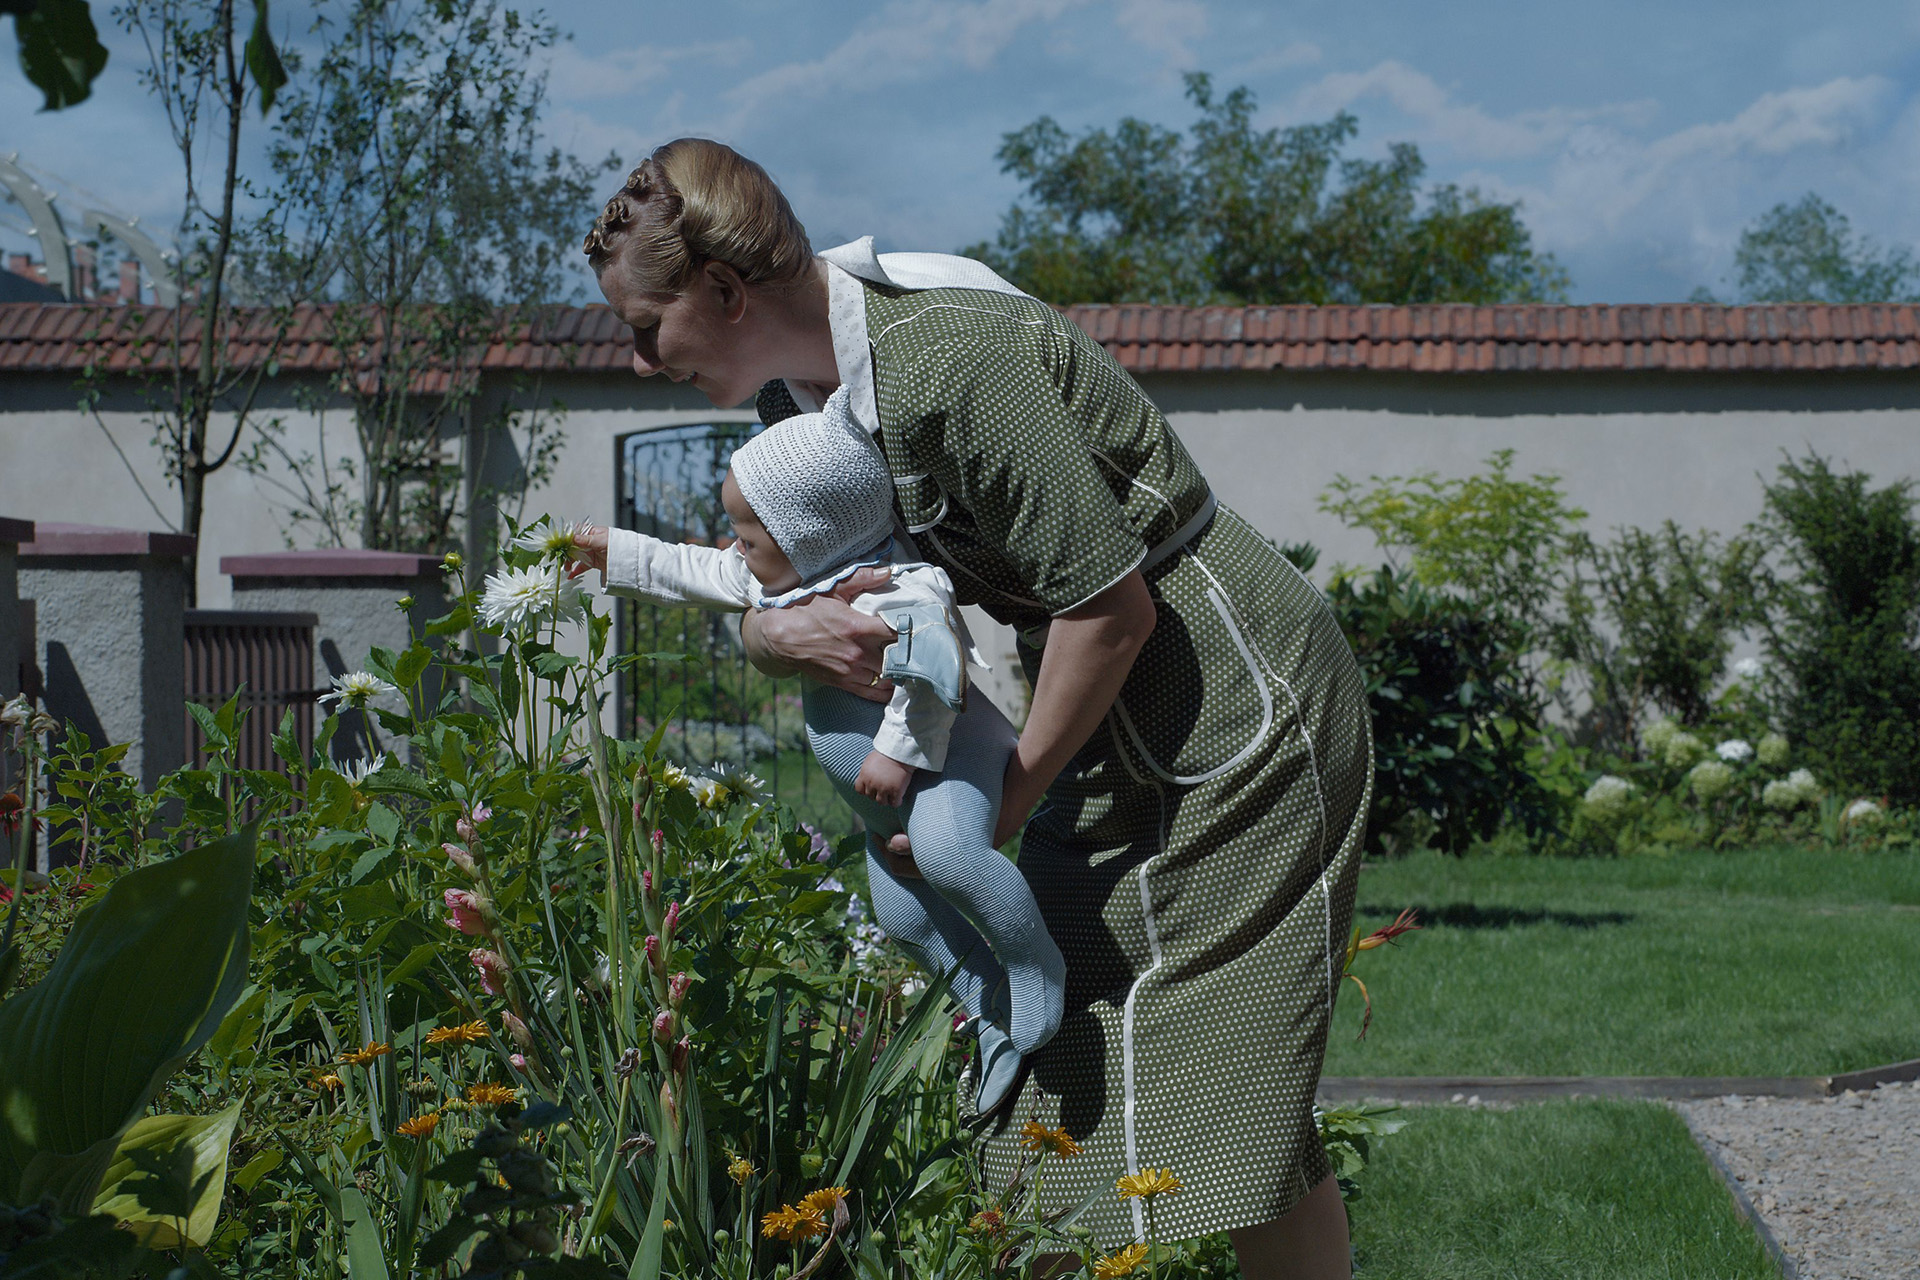 A still from The Zone of Interest depicting a woman holding a baby beside some plants